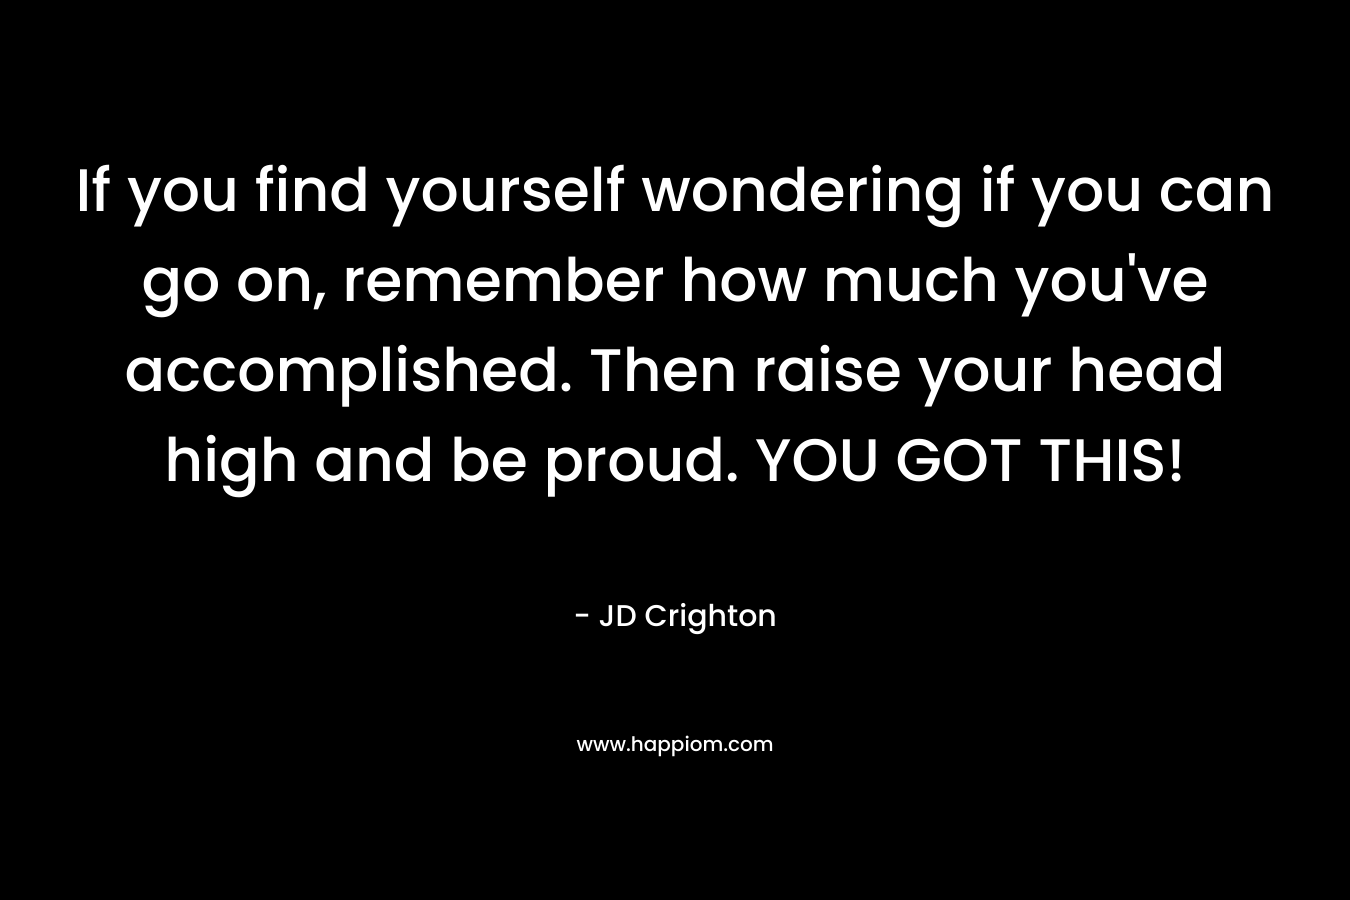 If you find yourself wondering if you can go on, remember how much you've accomplished. Then raise your head high and be proud. YOU GOT THIS!